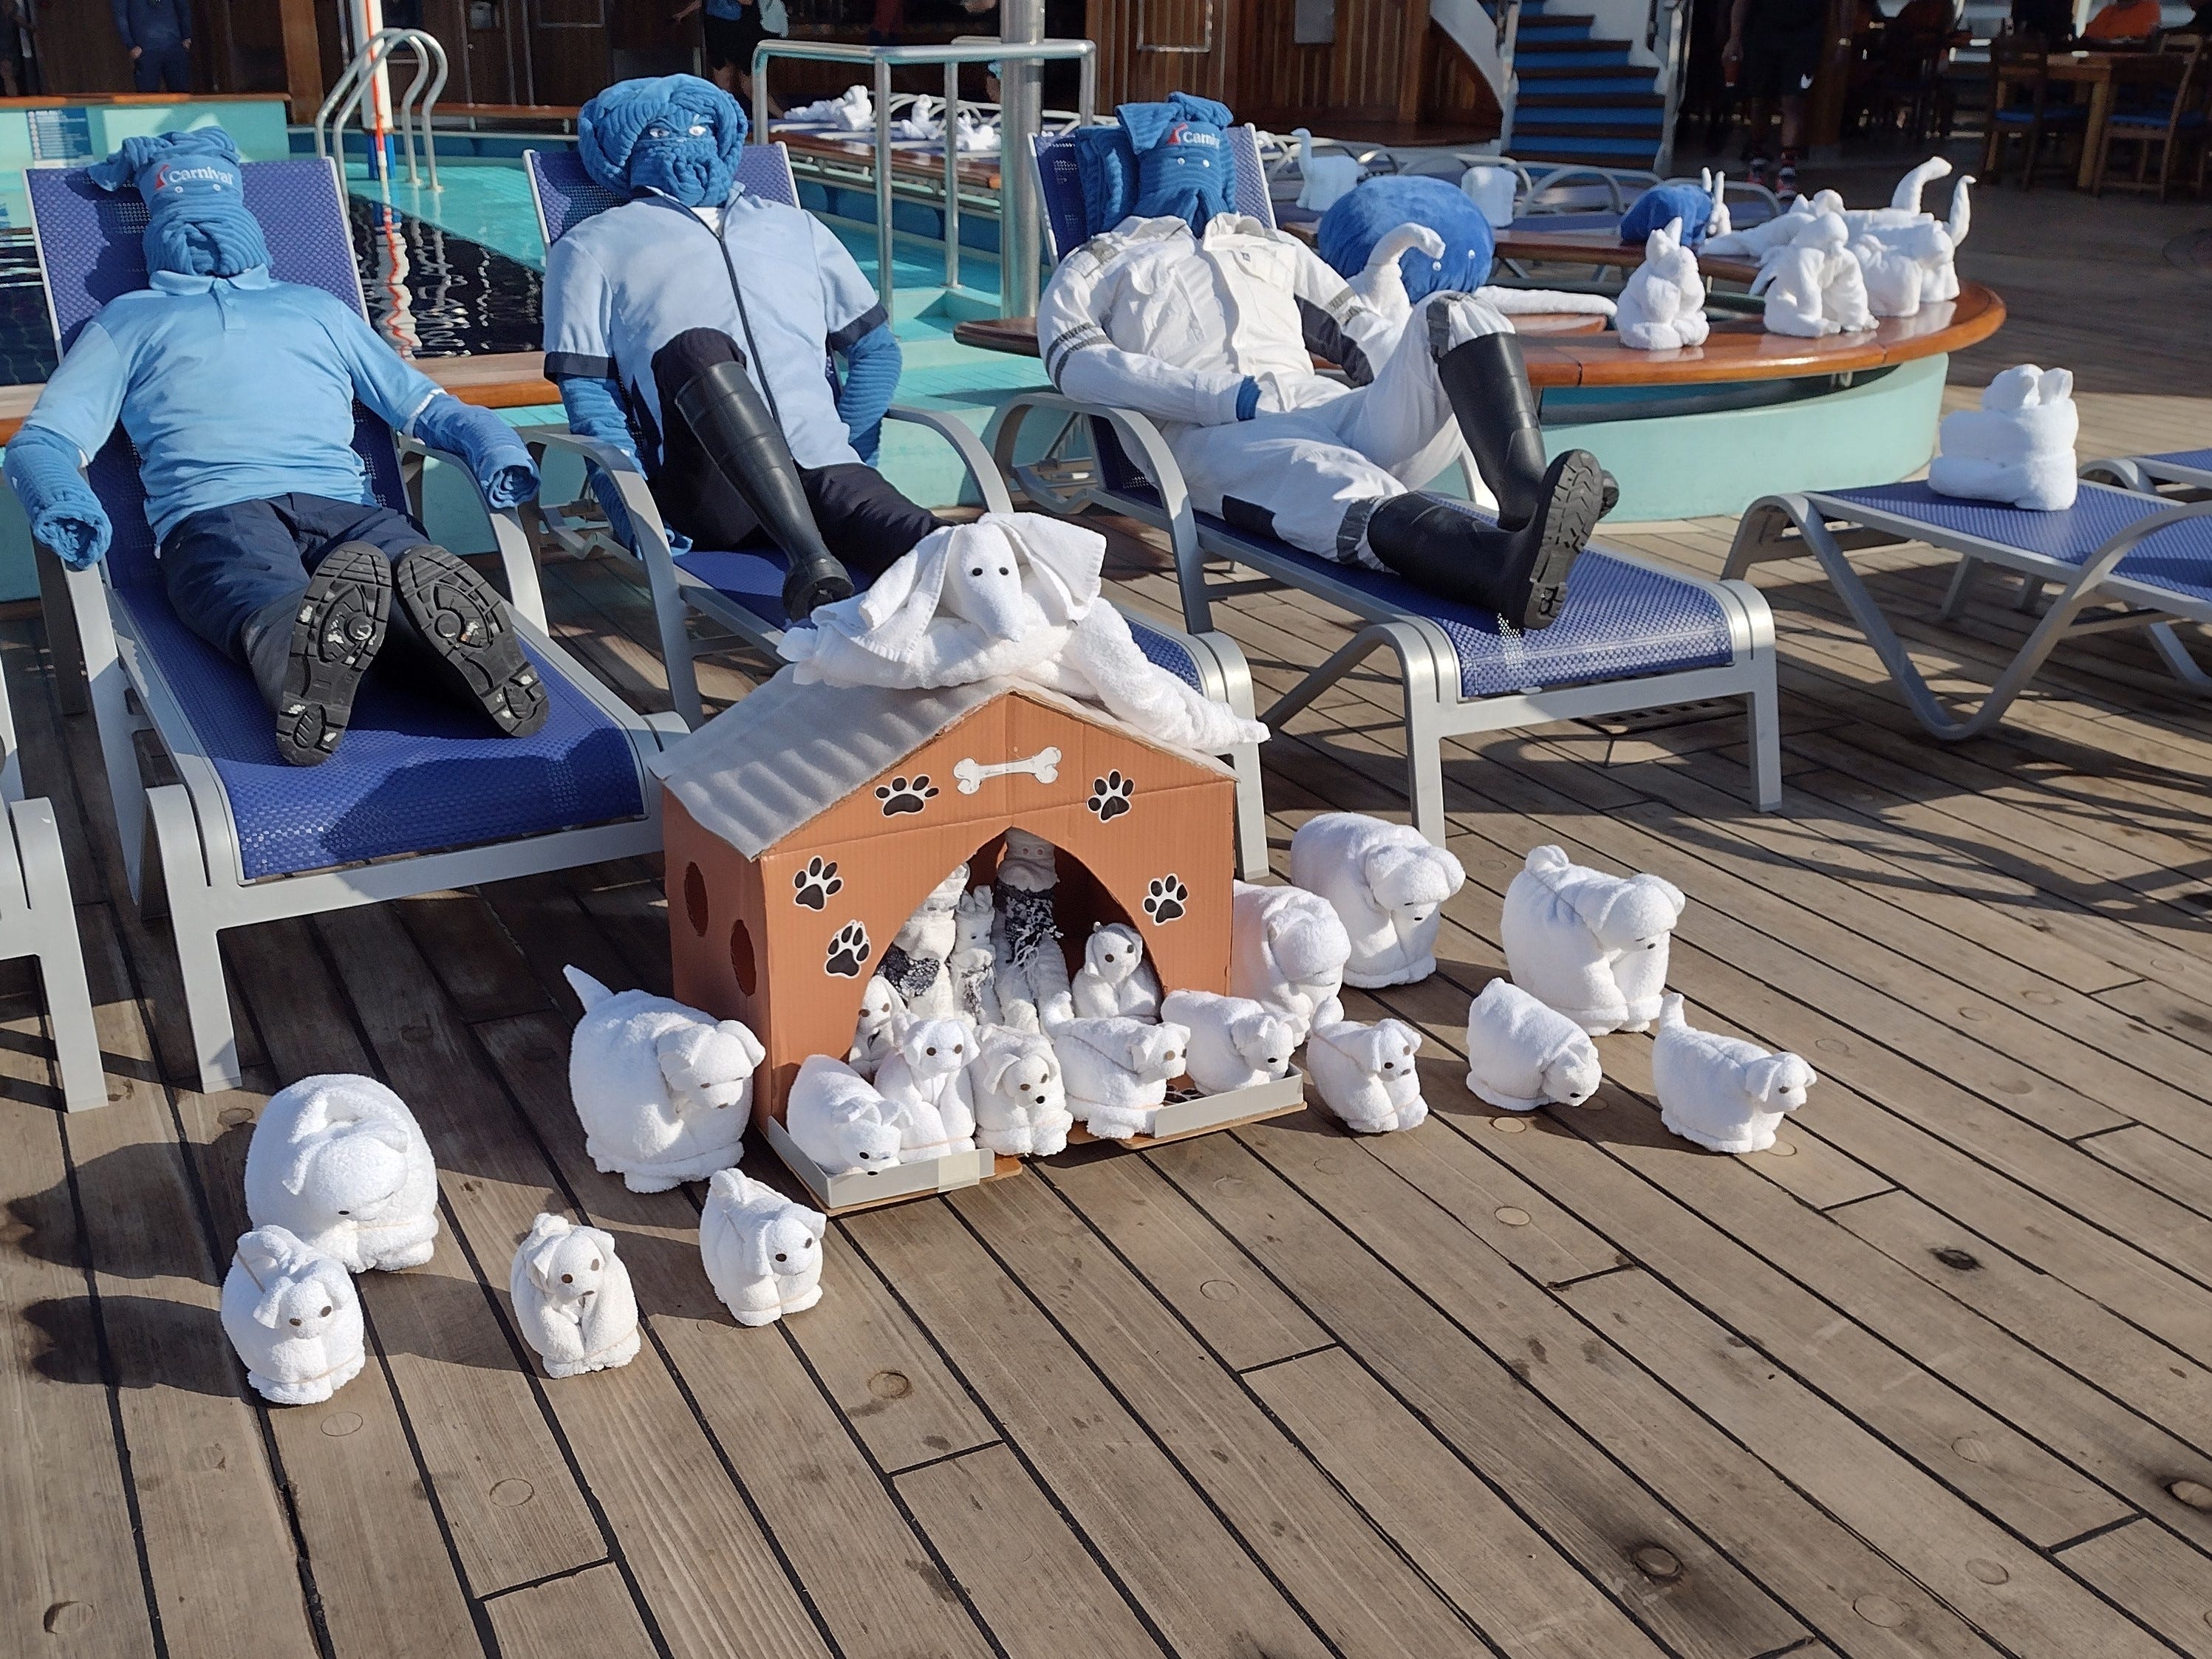 <p>As a repeat cruise guest, I've come to expect a cute towel animal in my stateroom after the steward tidies my cabin for the day.</p><p>But I love that Carnival takes this small detail a step further by hosting a towel animal takeover one morning of each sailing. That's when the crew makes hundreds of towel animals and fills the pool deck with their creations. </p><p>Late risers will easily miss this, so take note that on all my Carnival cruises, it's usually been on the last morning of the cruise.</p><p>I always smile when I wander to the Lido deck en route to the breakfast buffet and am greeted by a deck-wide spread of towel animals. They come in all shapes and sizes, all artfully crafted by the imaginative crew, and are a small reminder to me of how fun it is to sail with Carnival.</p>